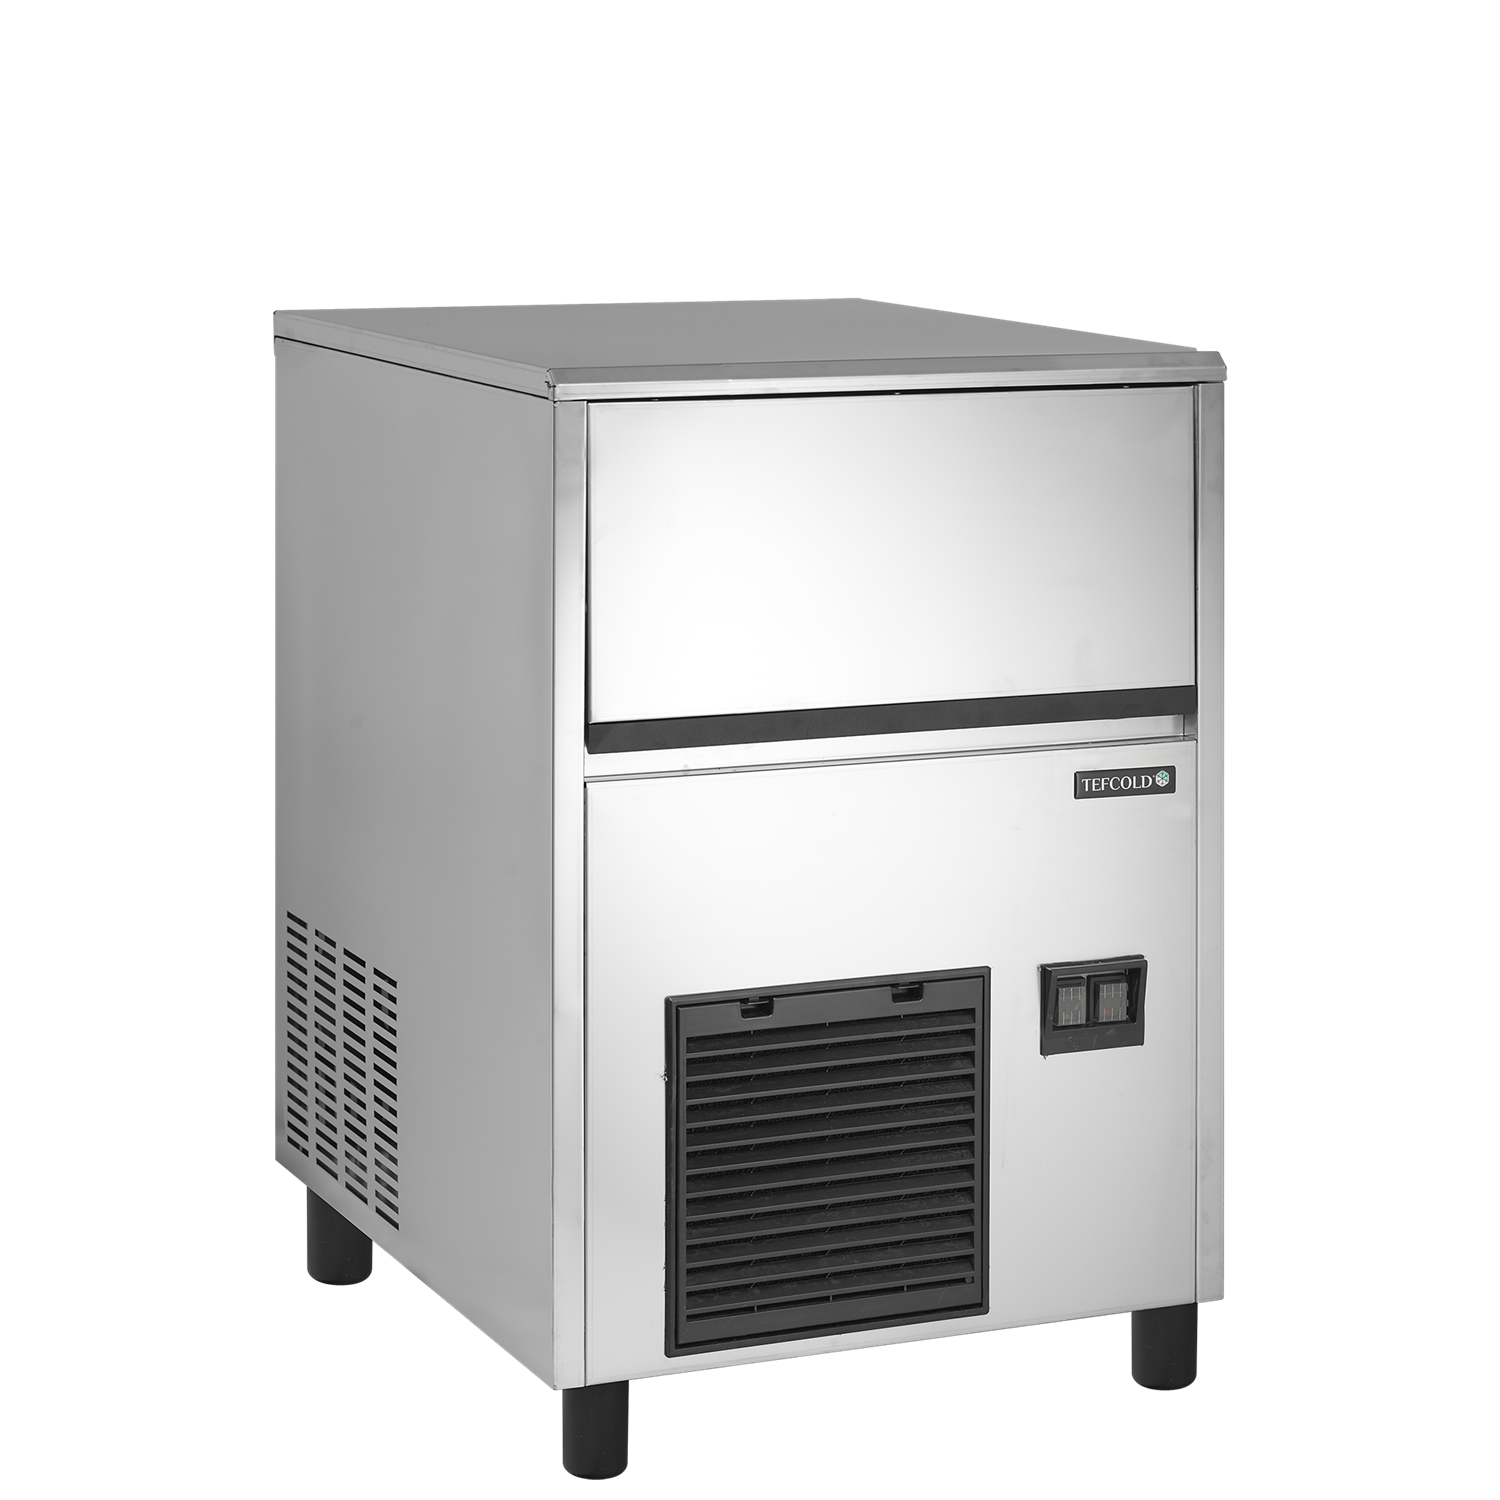 Tefcold TC-37KG Ice Maker.Product Ref:00556.MODEL:TC37.🚚 3-5 Days Delivery